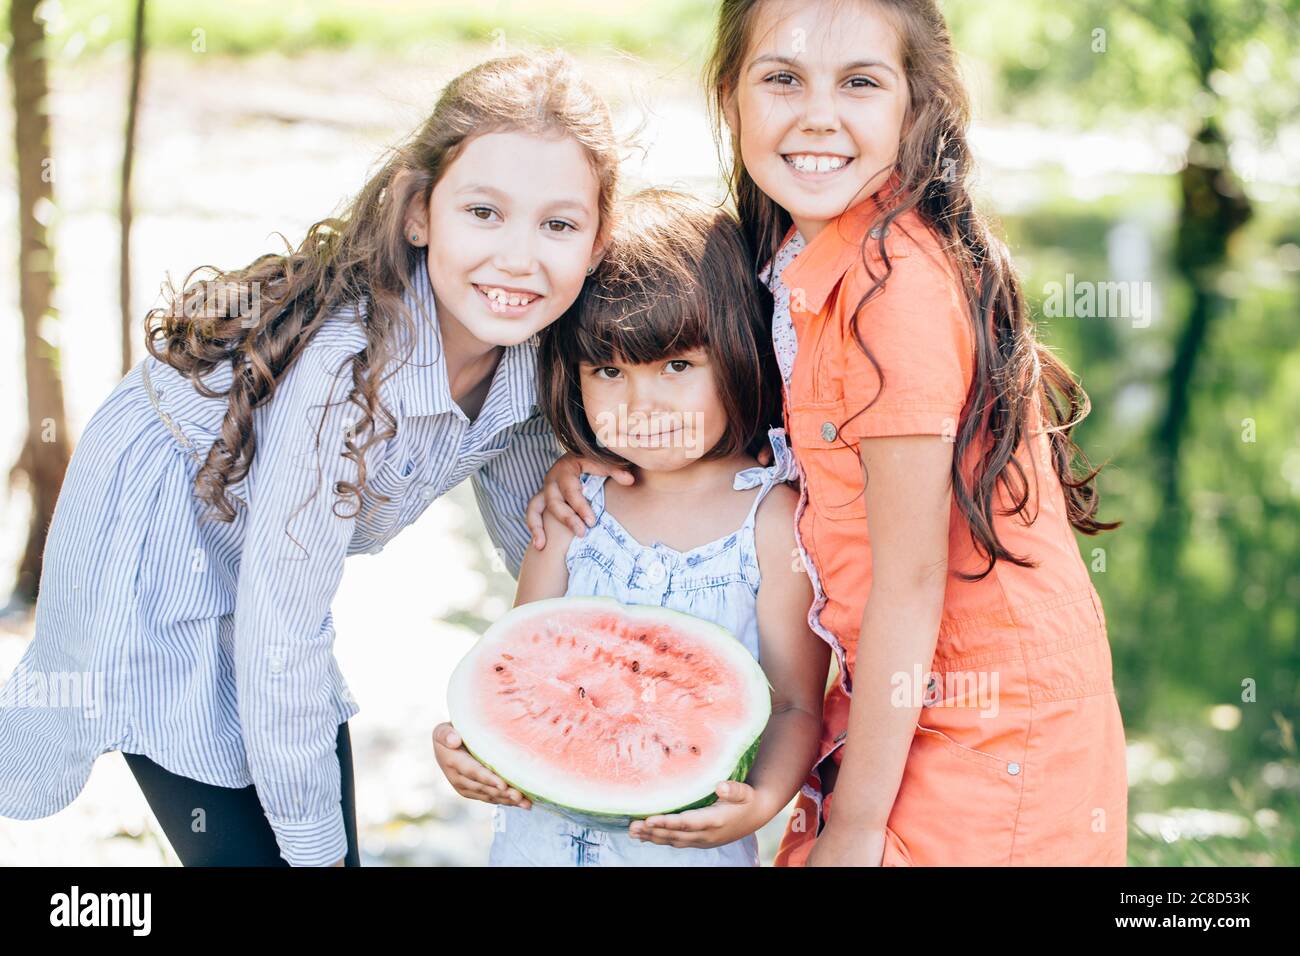 Three young cute funny girls eating watermelon and making funny faces over park outdoor Stock Photo